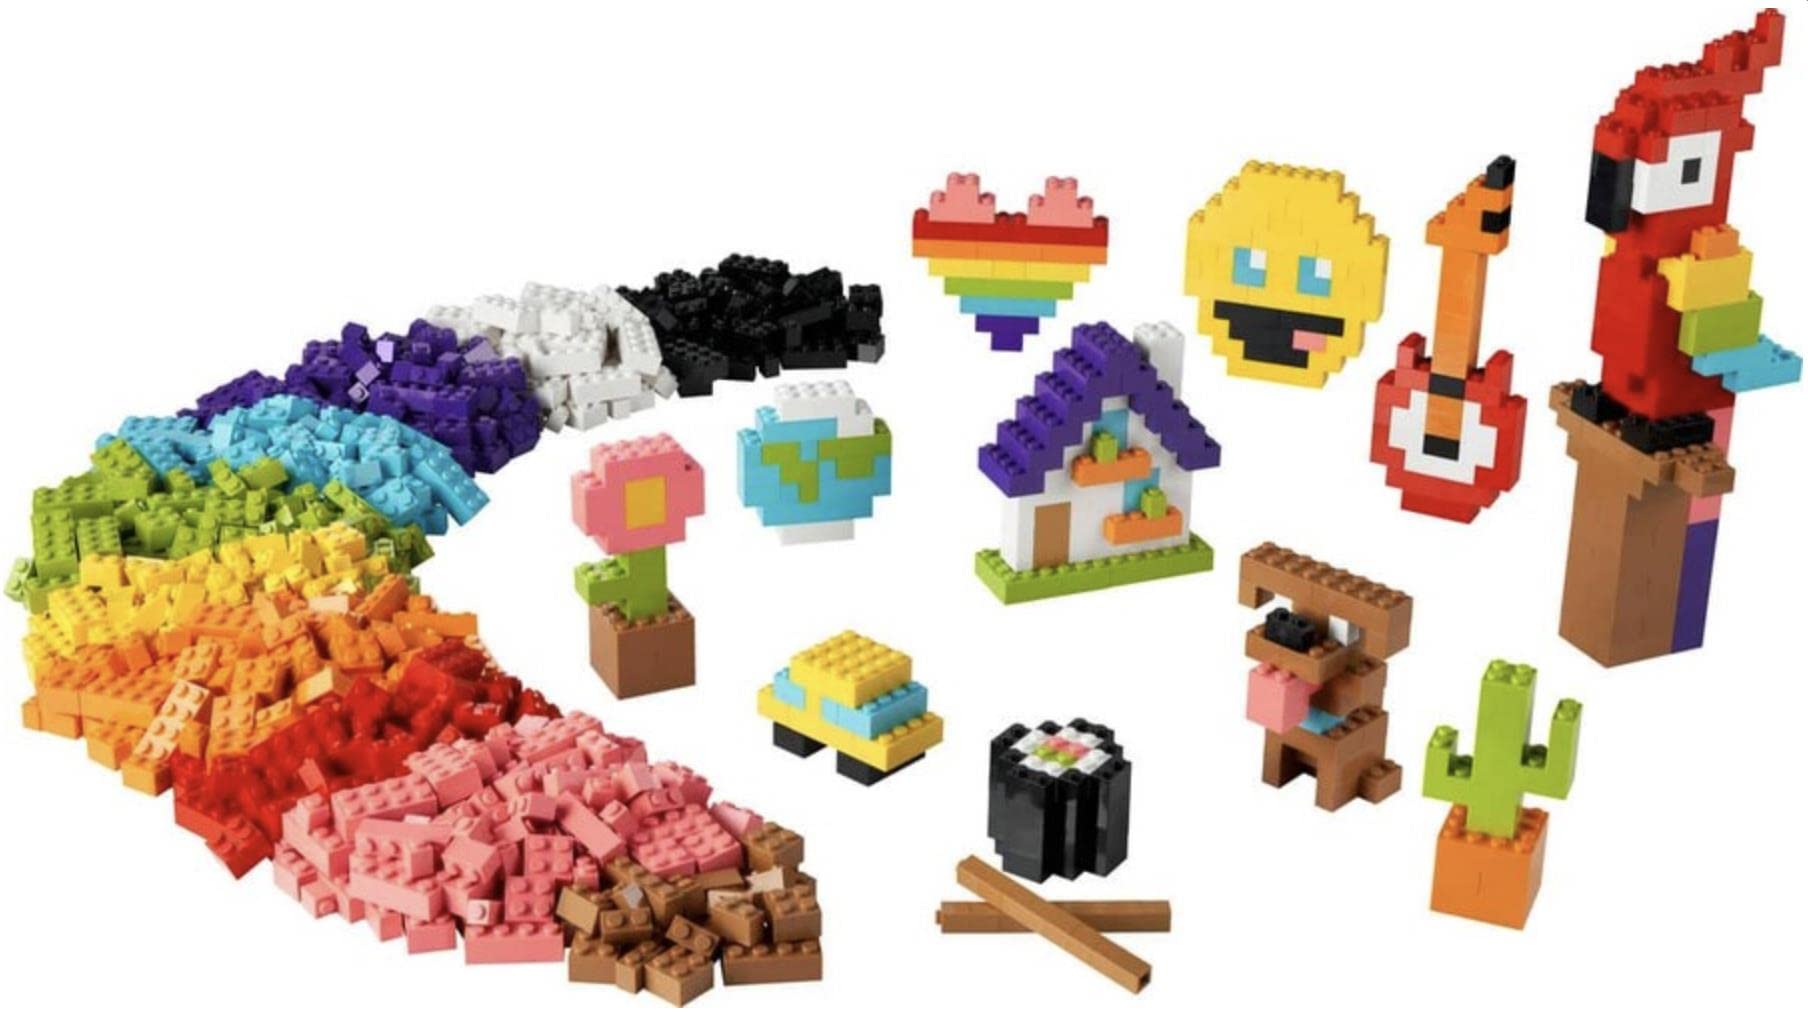 LEGO 11030 Classic Large Creative Building Set Construction Toy Set, Build a Smiley Emoji, Parrot, Flowers & More, Creative Building Blocks for Children, Boys, Girls from 5 Years